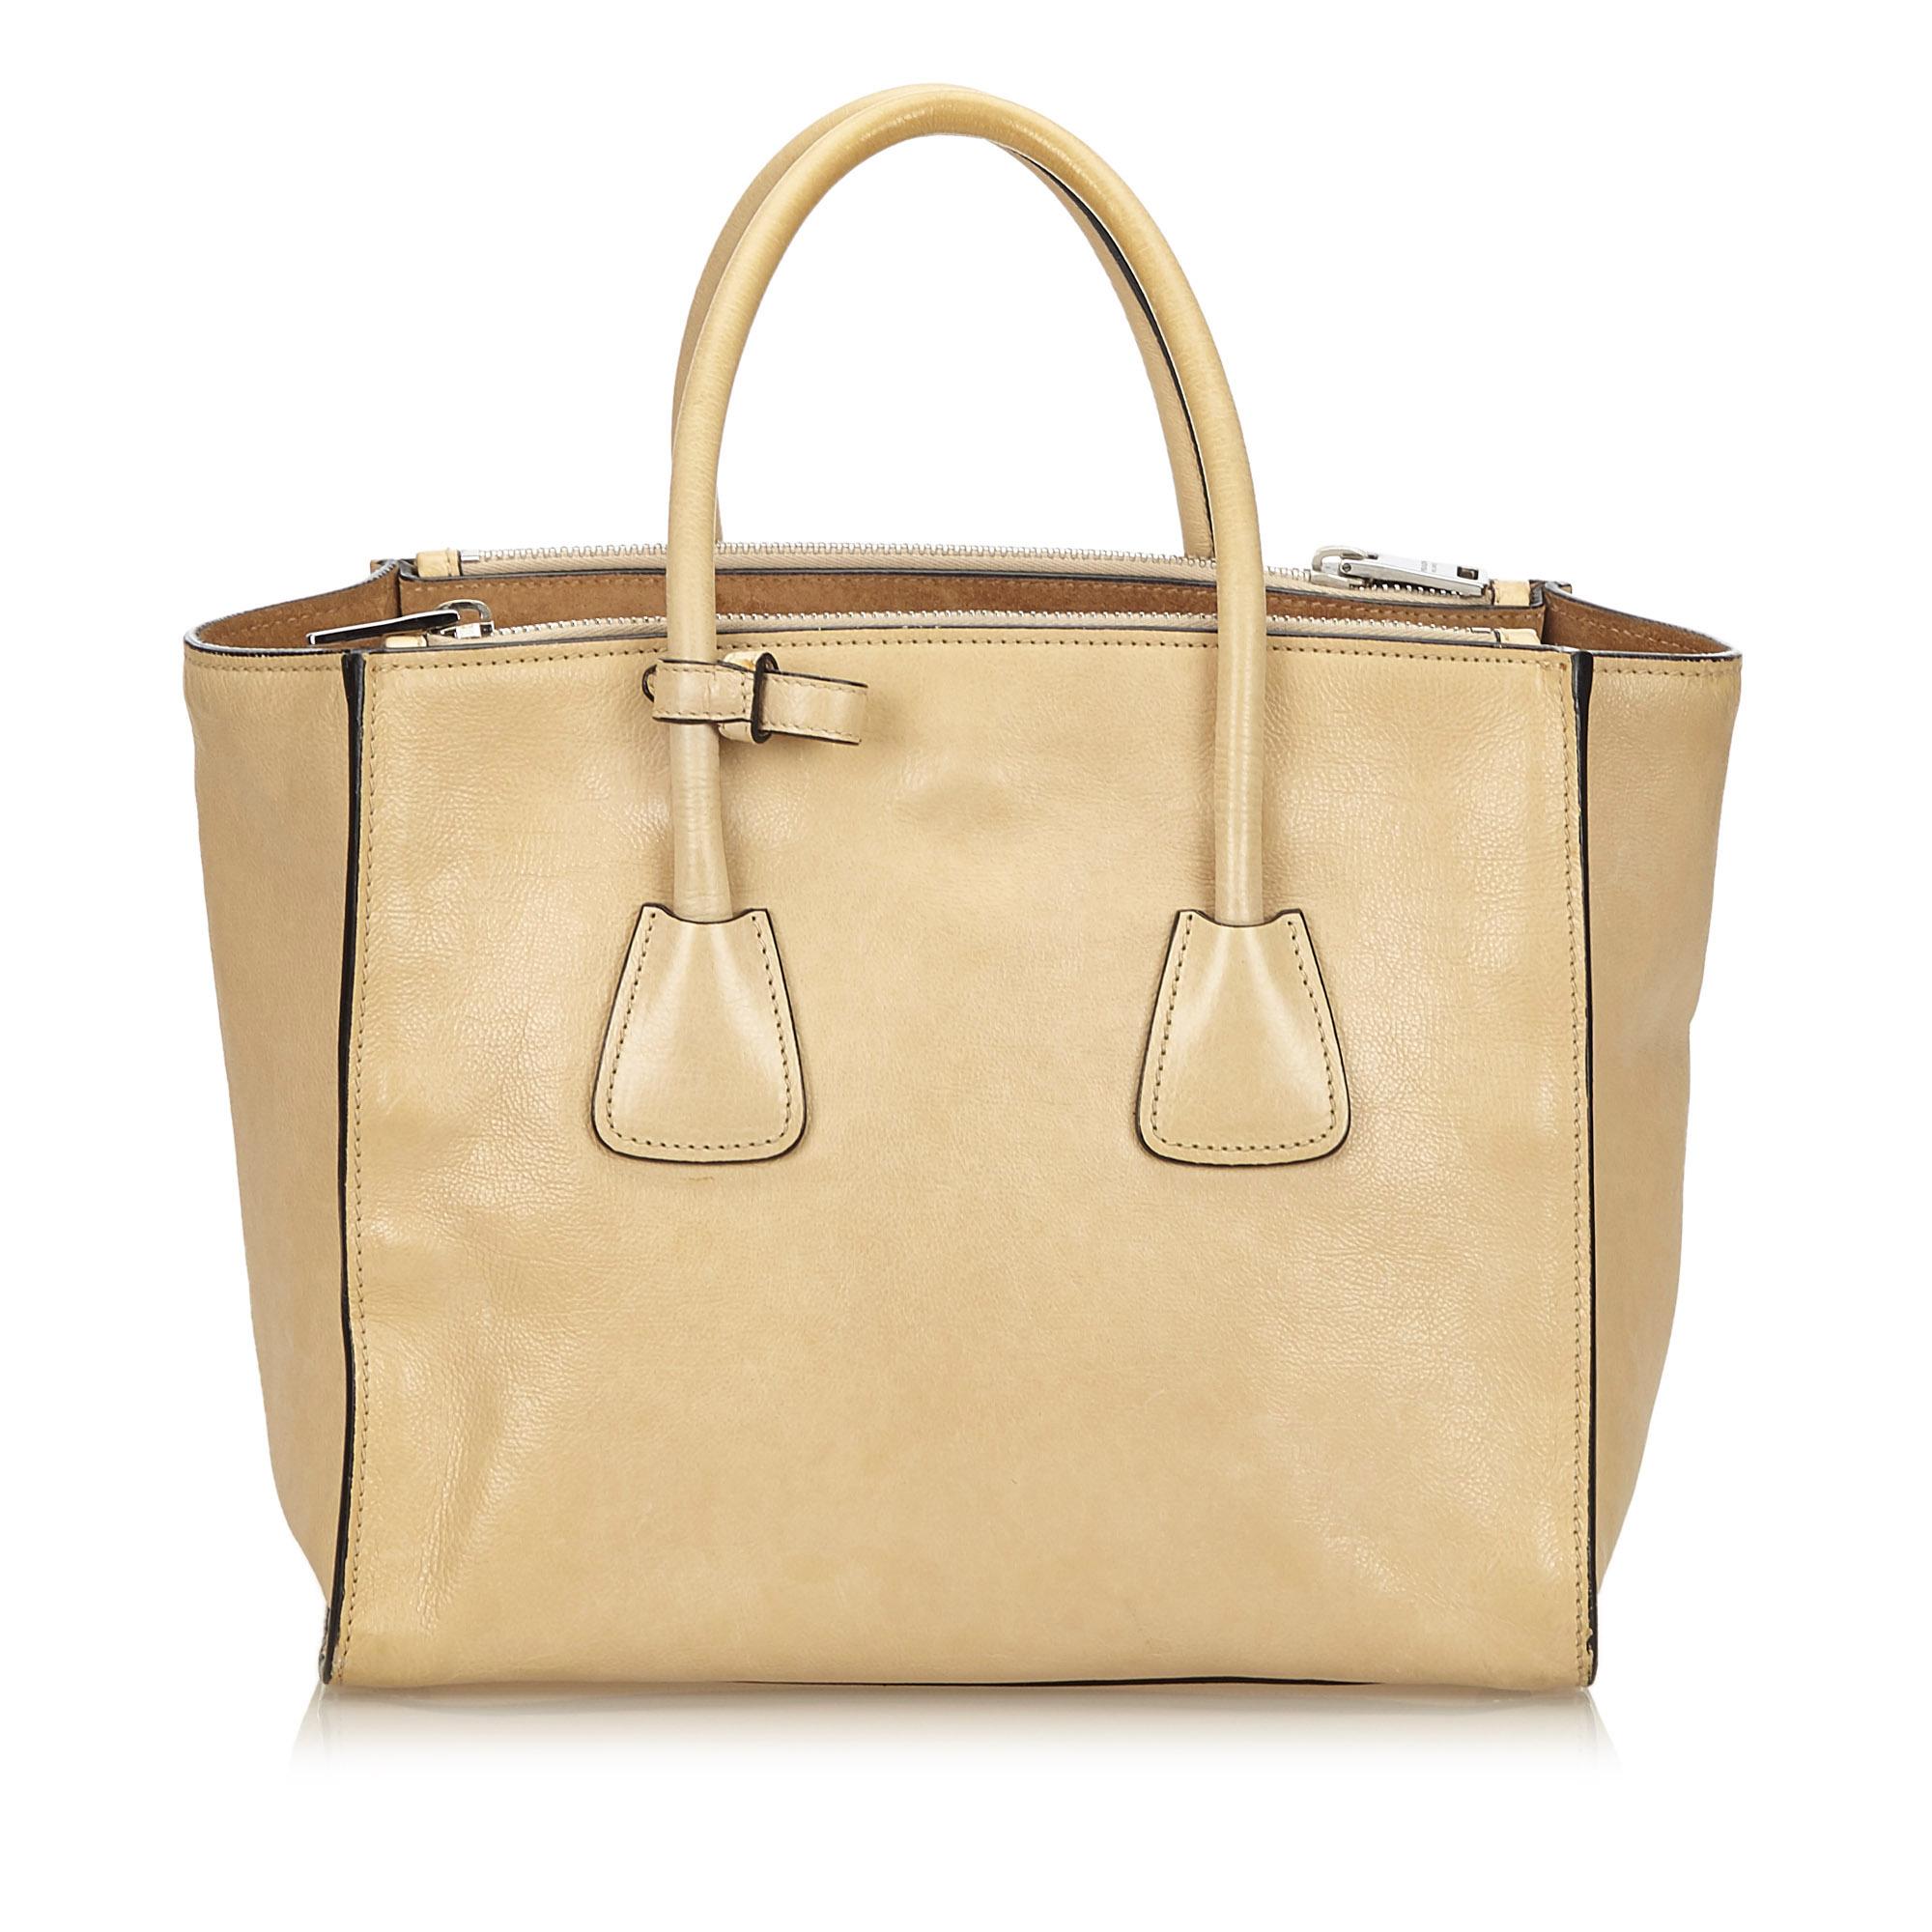 Prada Brown x Beige Calf Leather Twin Pocket Tote In Good Condition For Sale In Orlando, FL